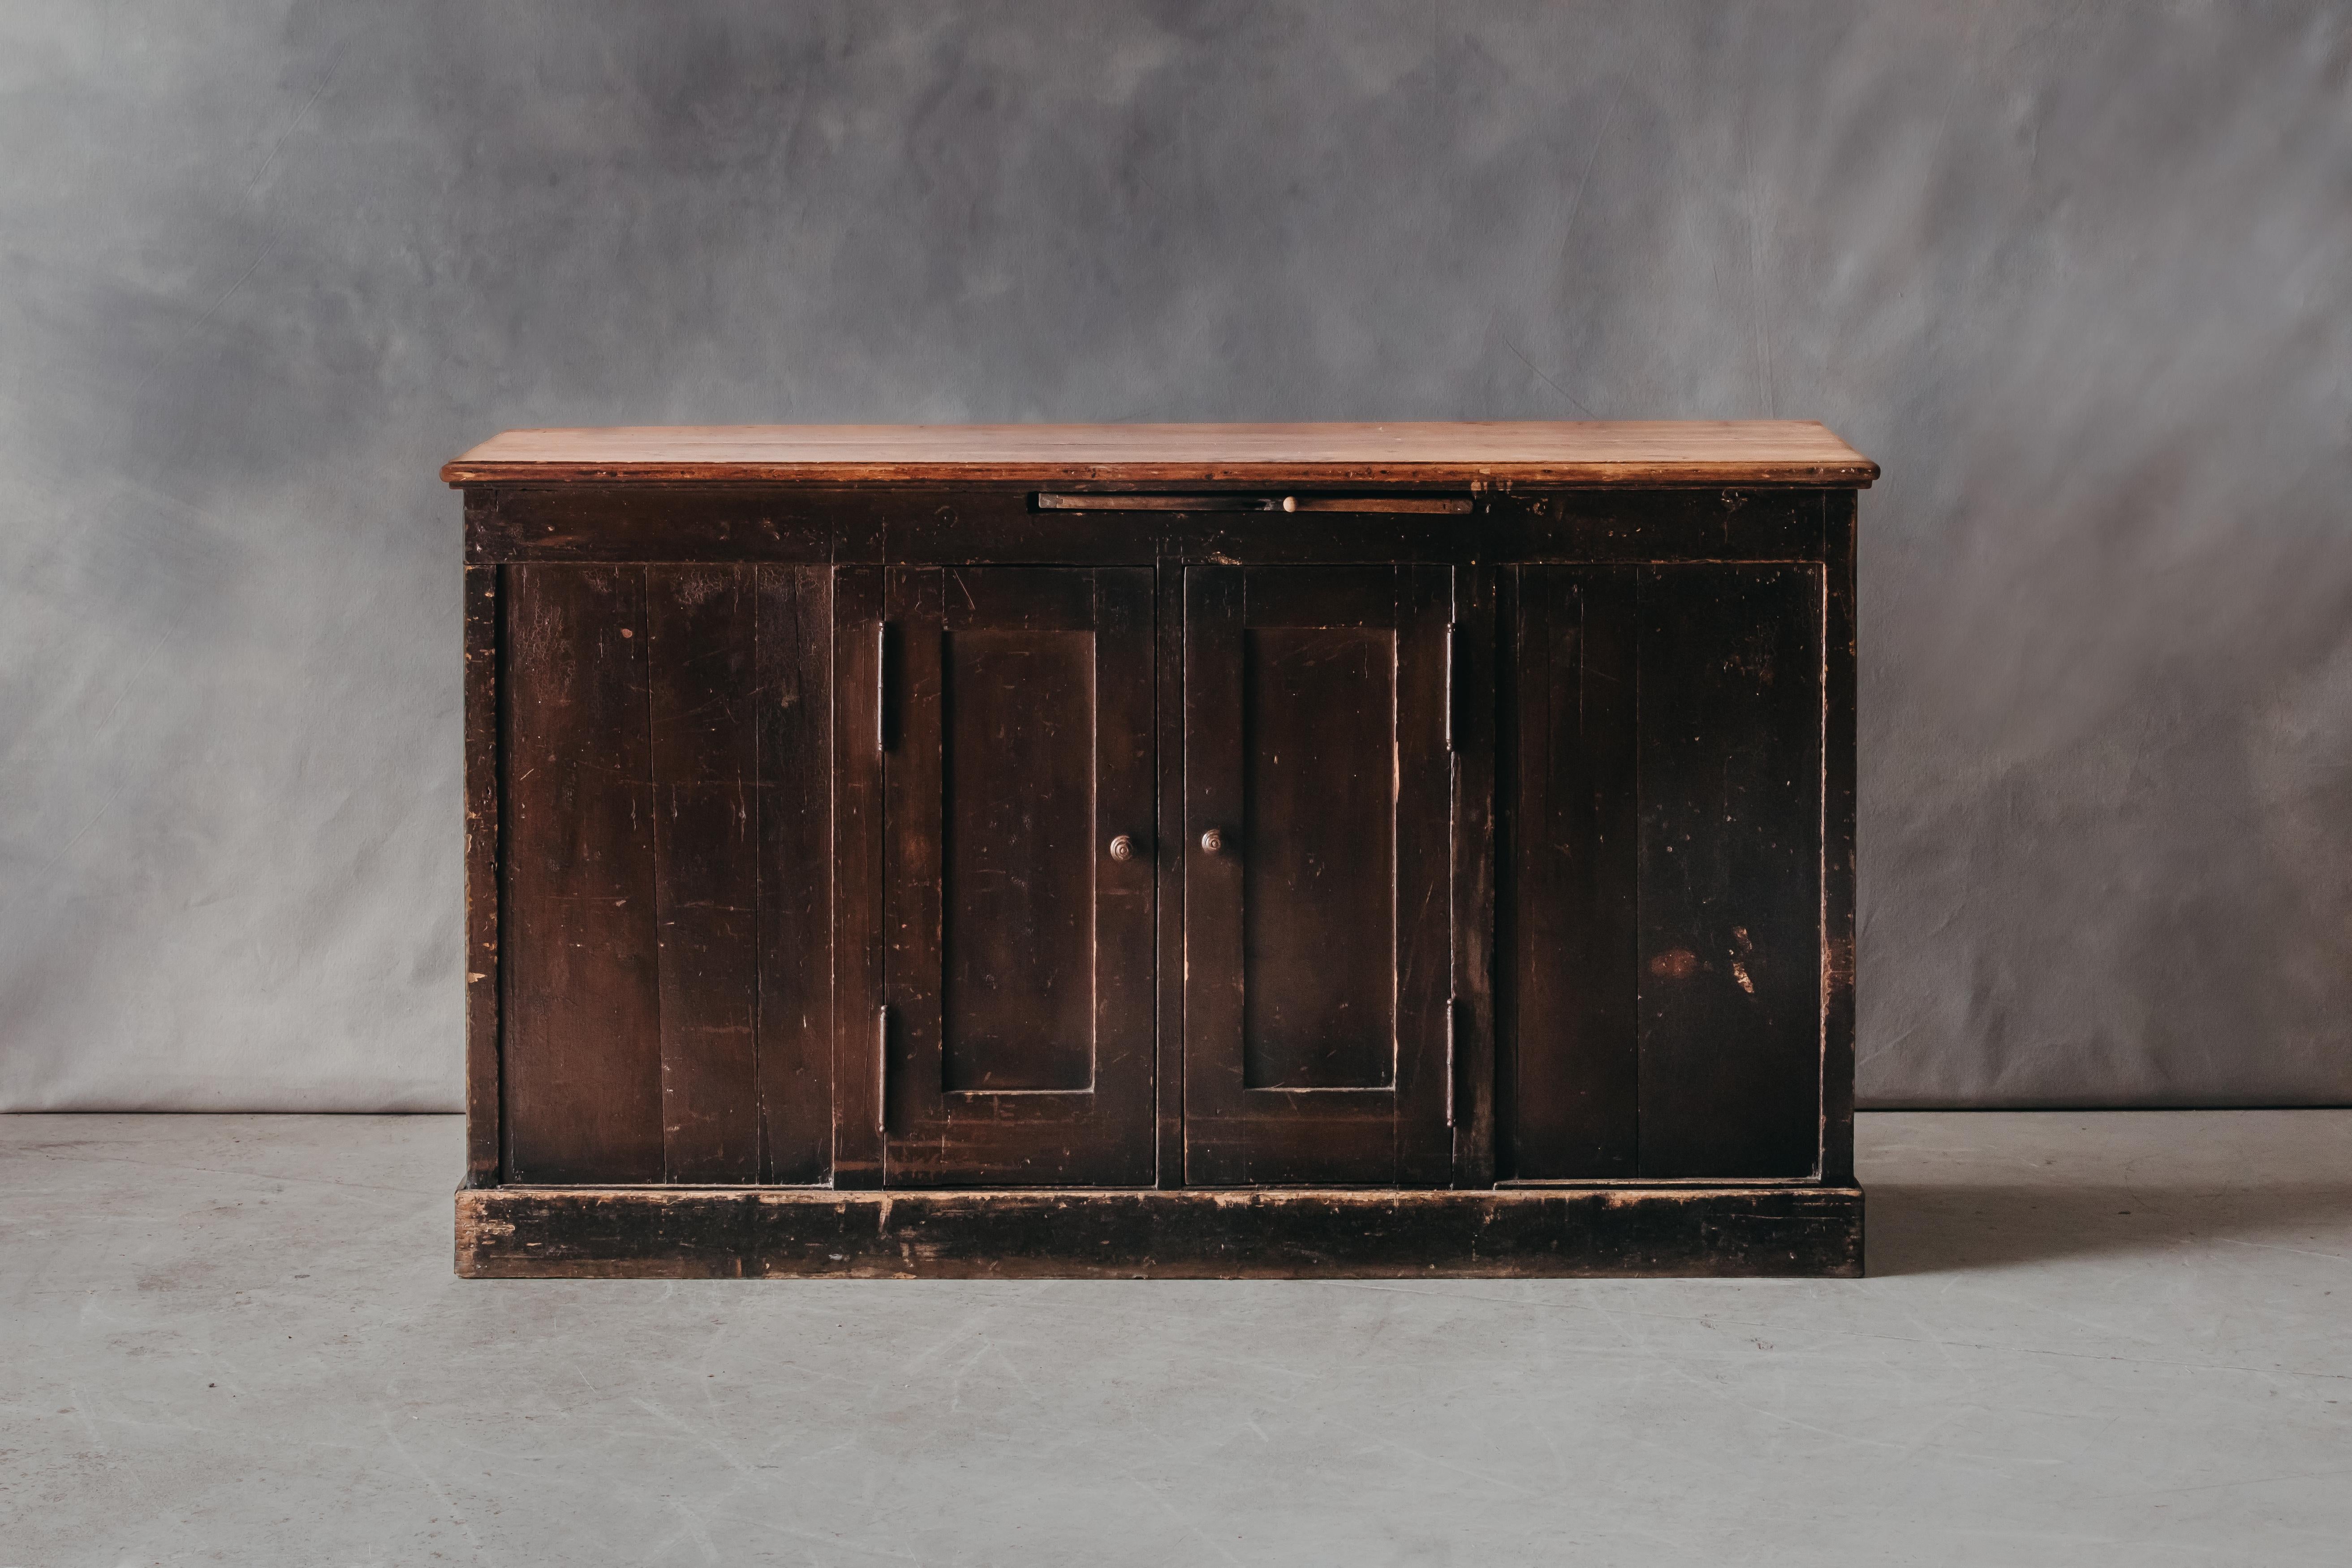 Vintage Kitchen Cabinet From France, circa 1950. Solid pine construction with nice use and patina.